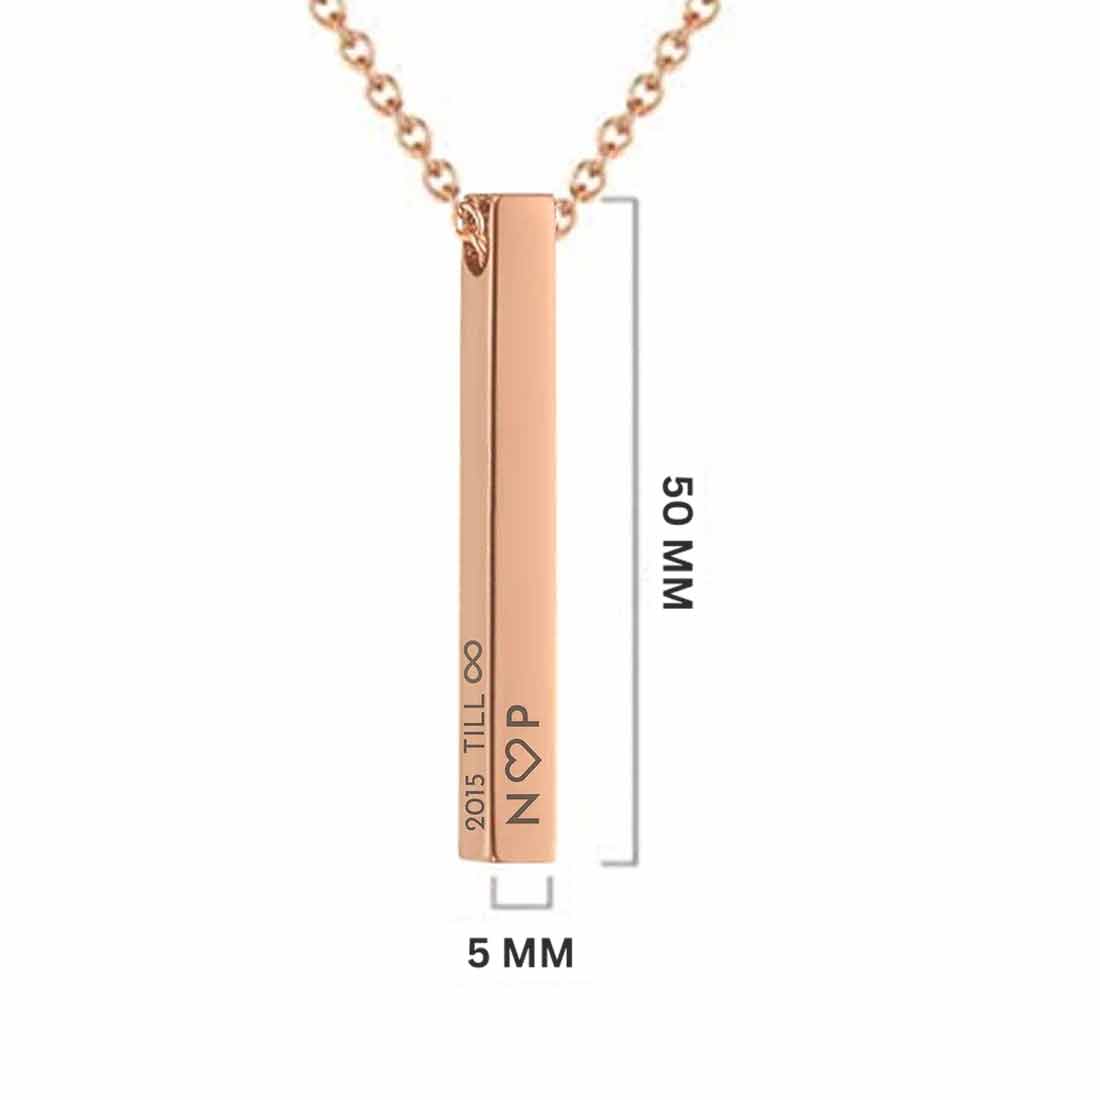 Custom Couples Pendant Necklace Rose Gold & Black with chain - Initials